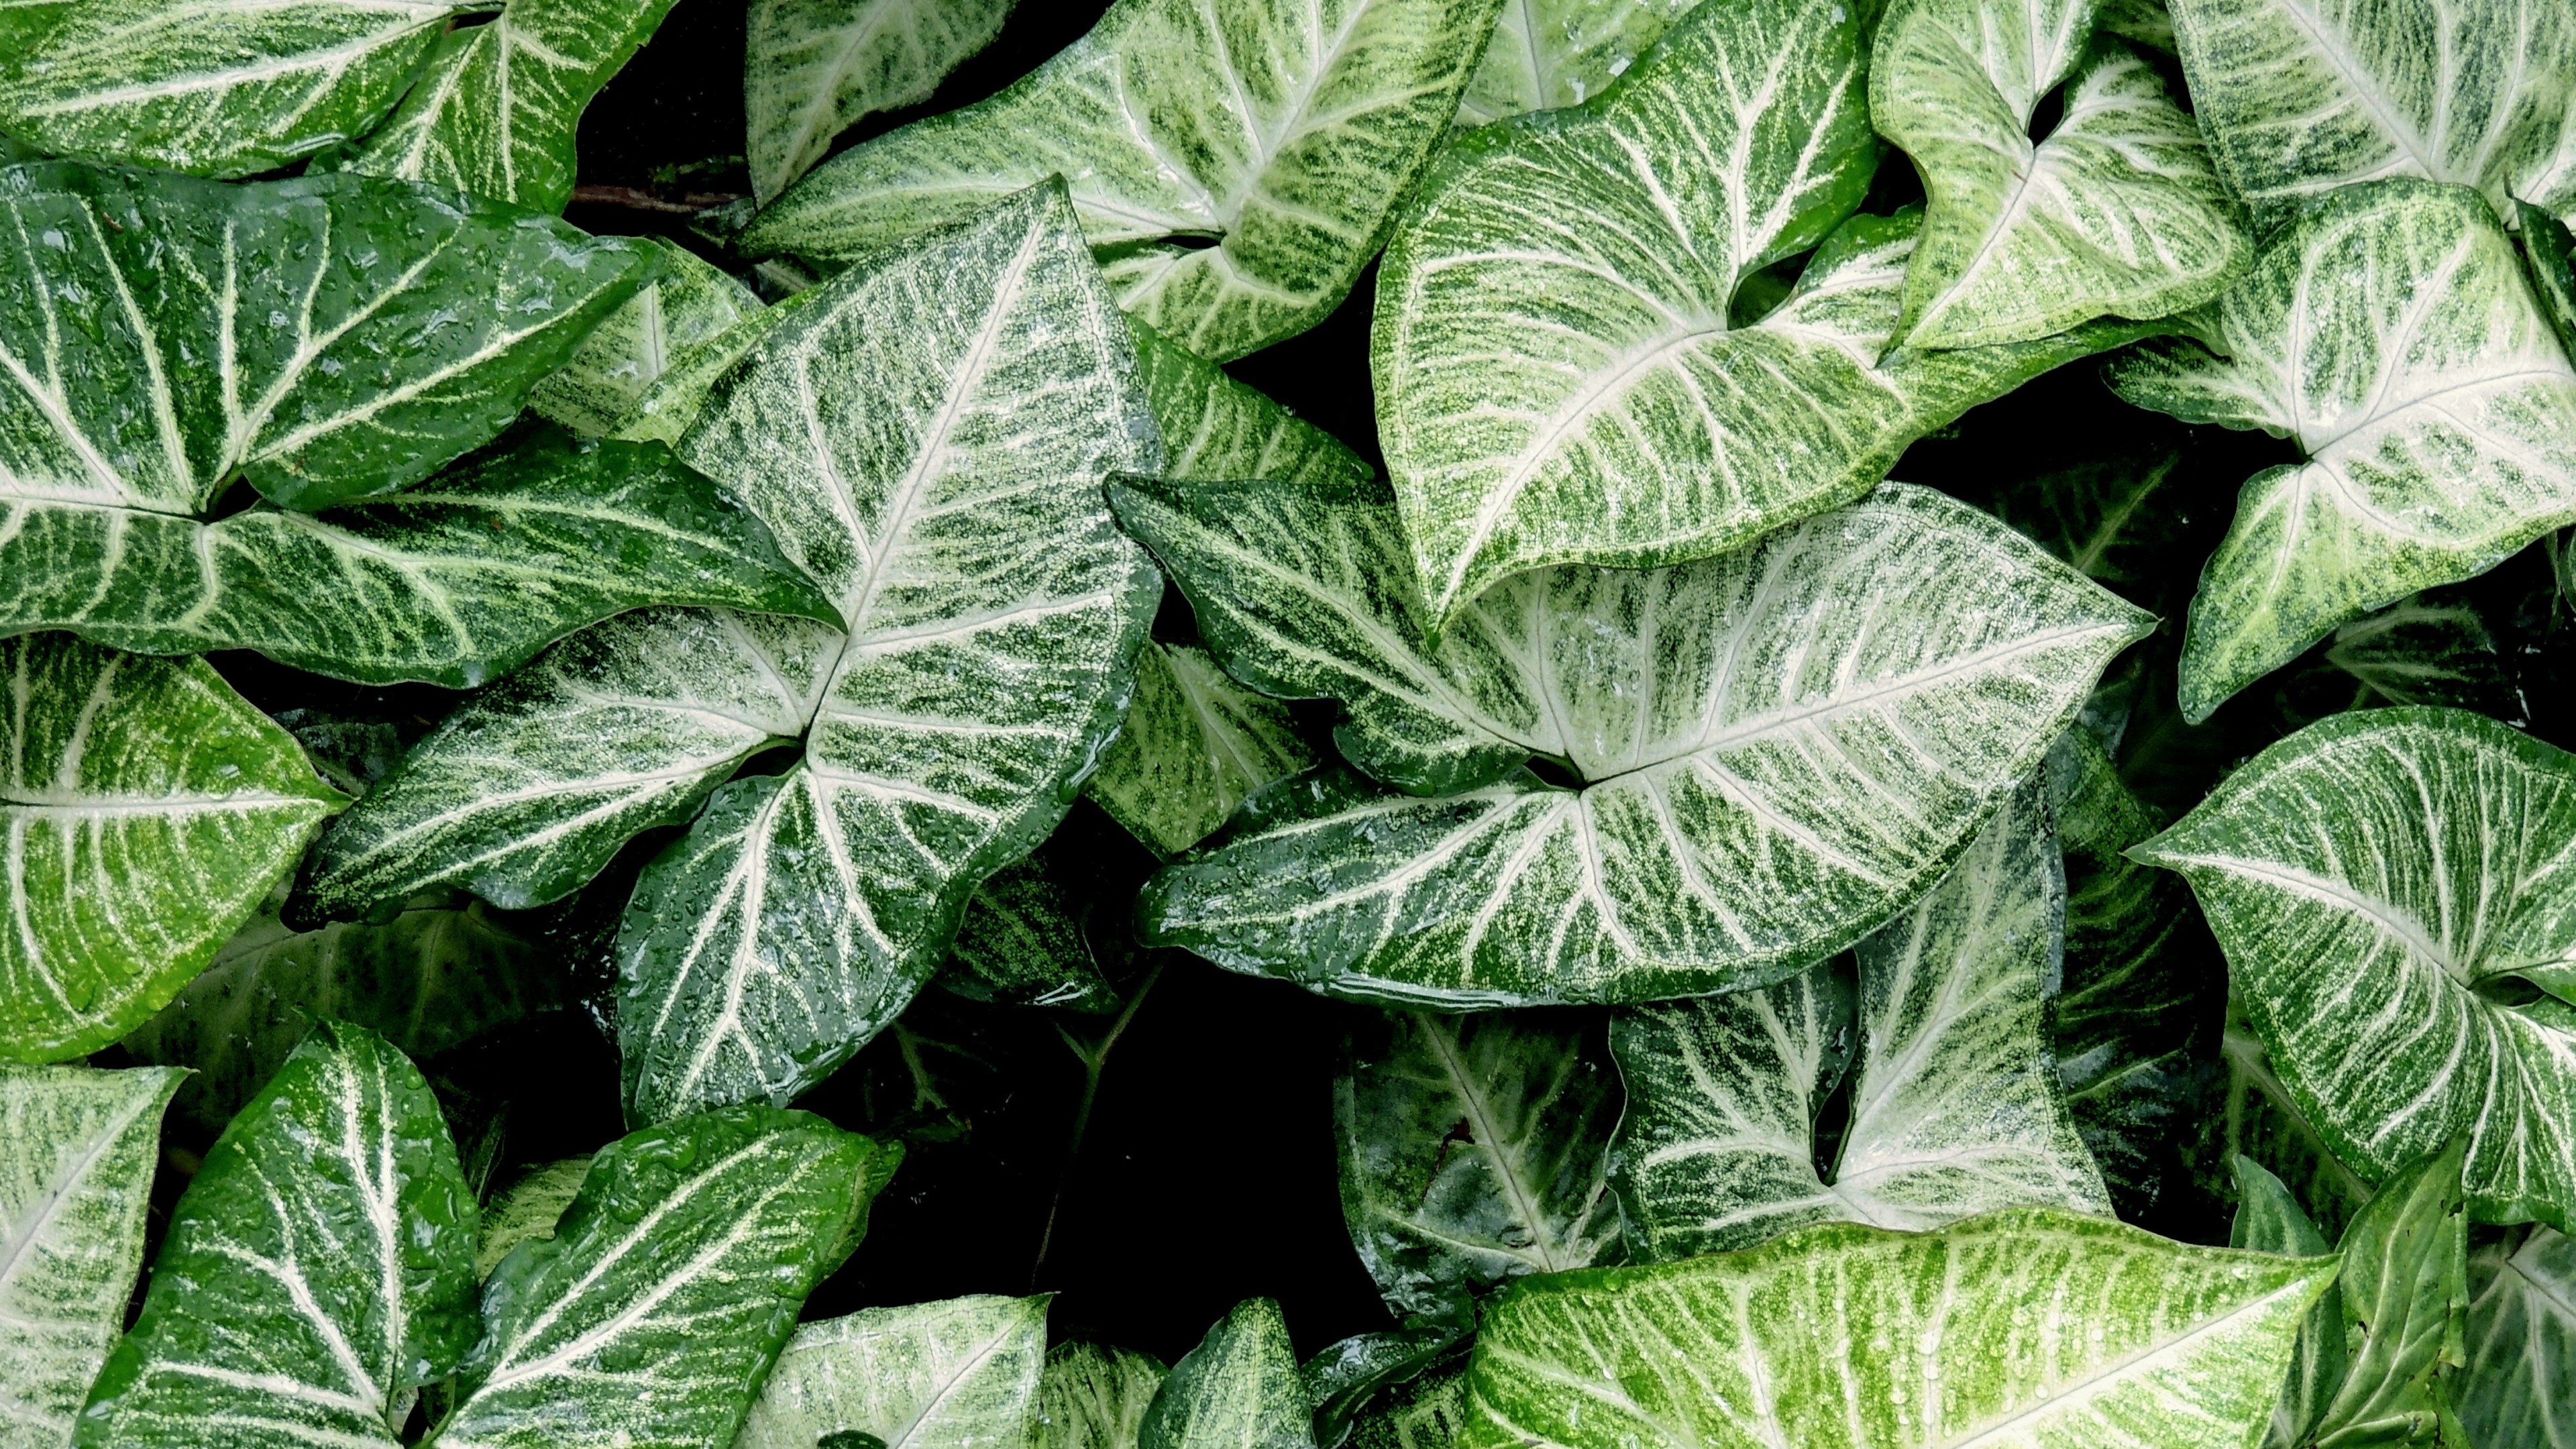 Green and White Leaves 4k Ultra HD Wallpaper. Background Image